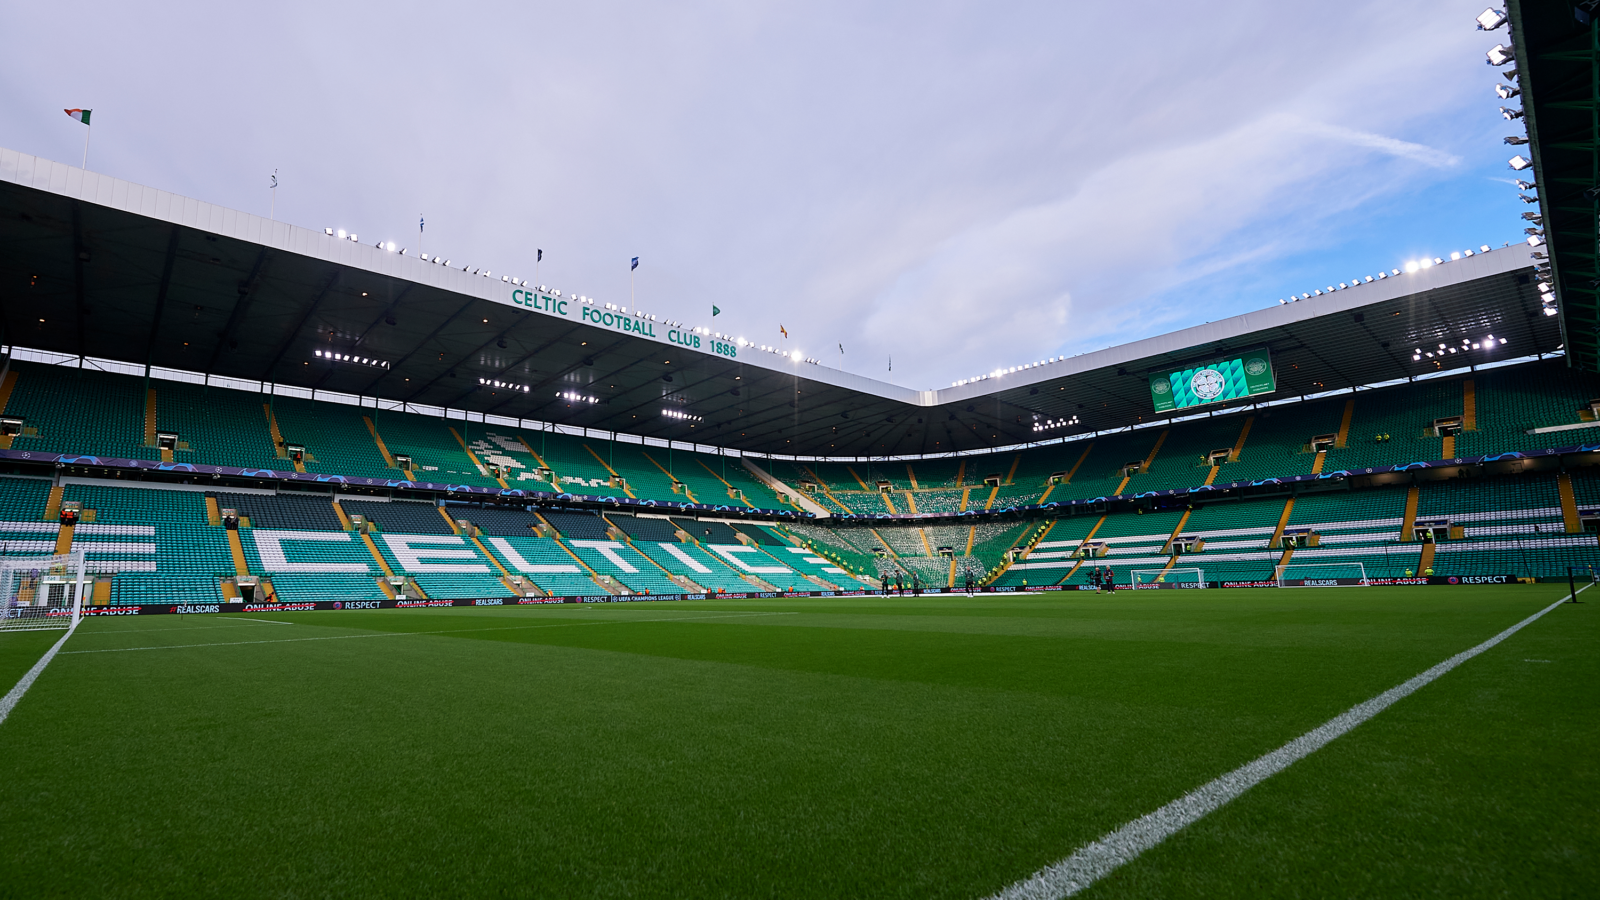 Celtic vs Motherwell Prediction: BTTS a top play at Parkhead